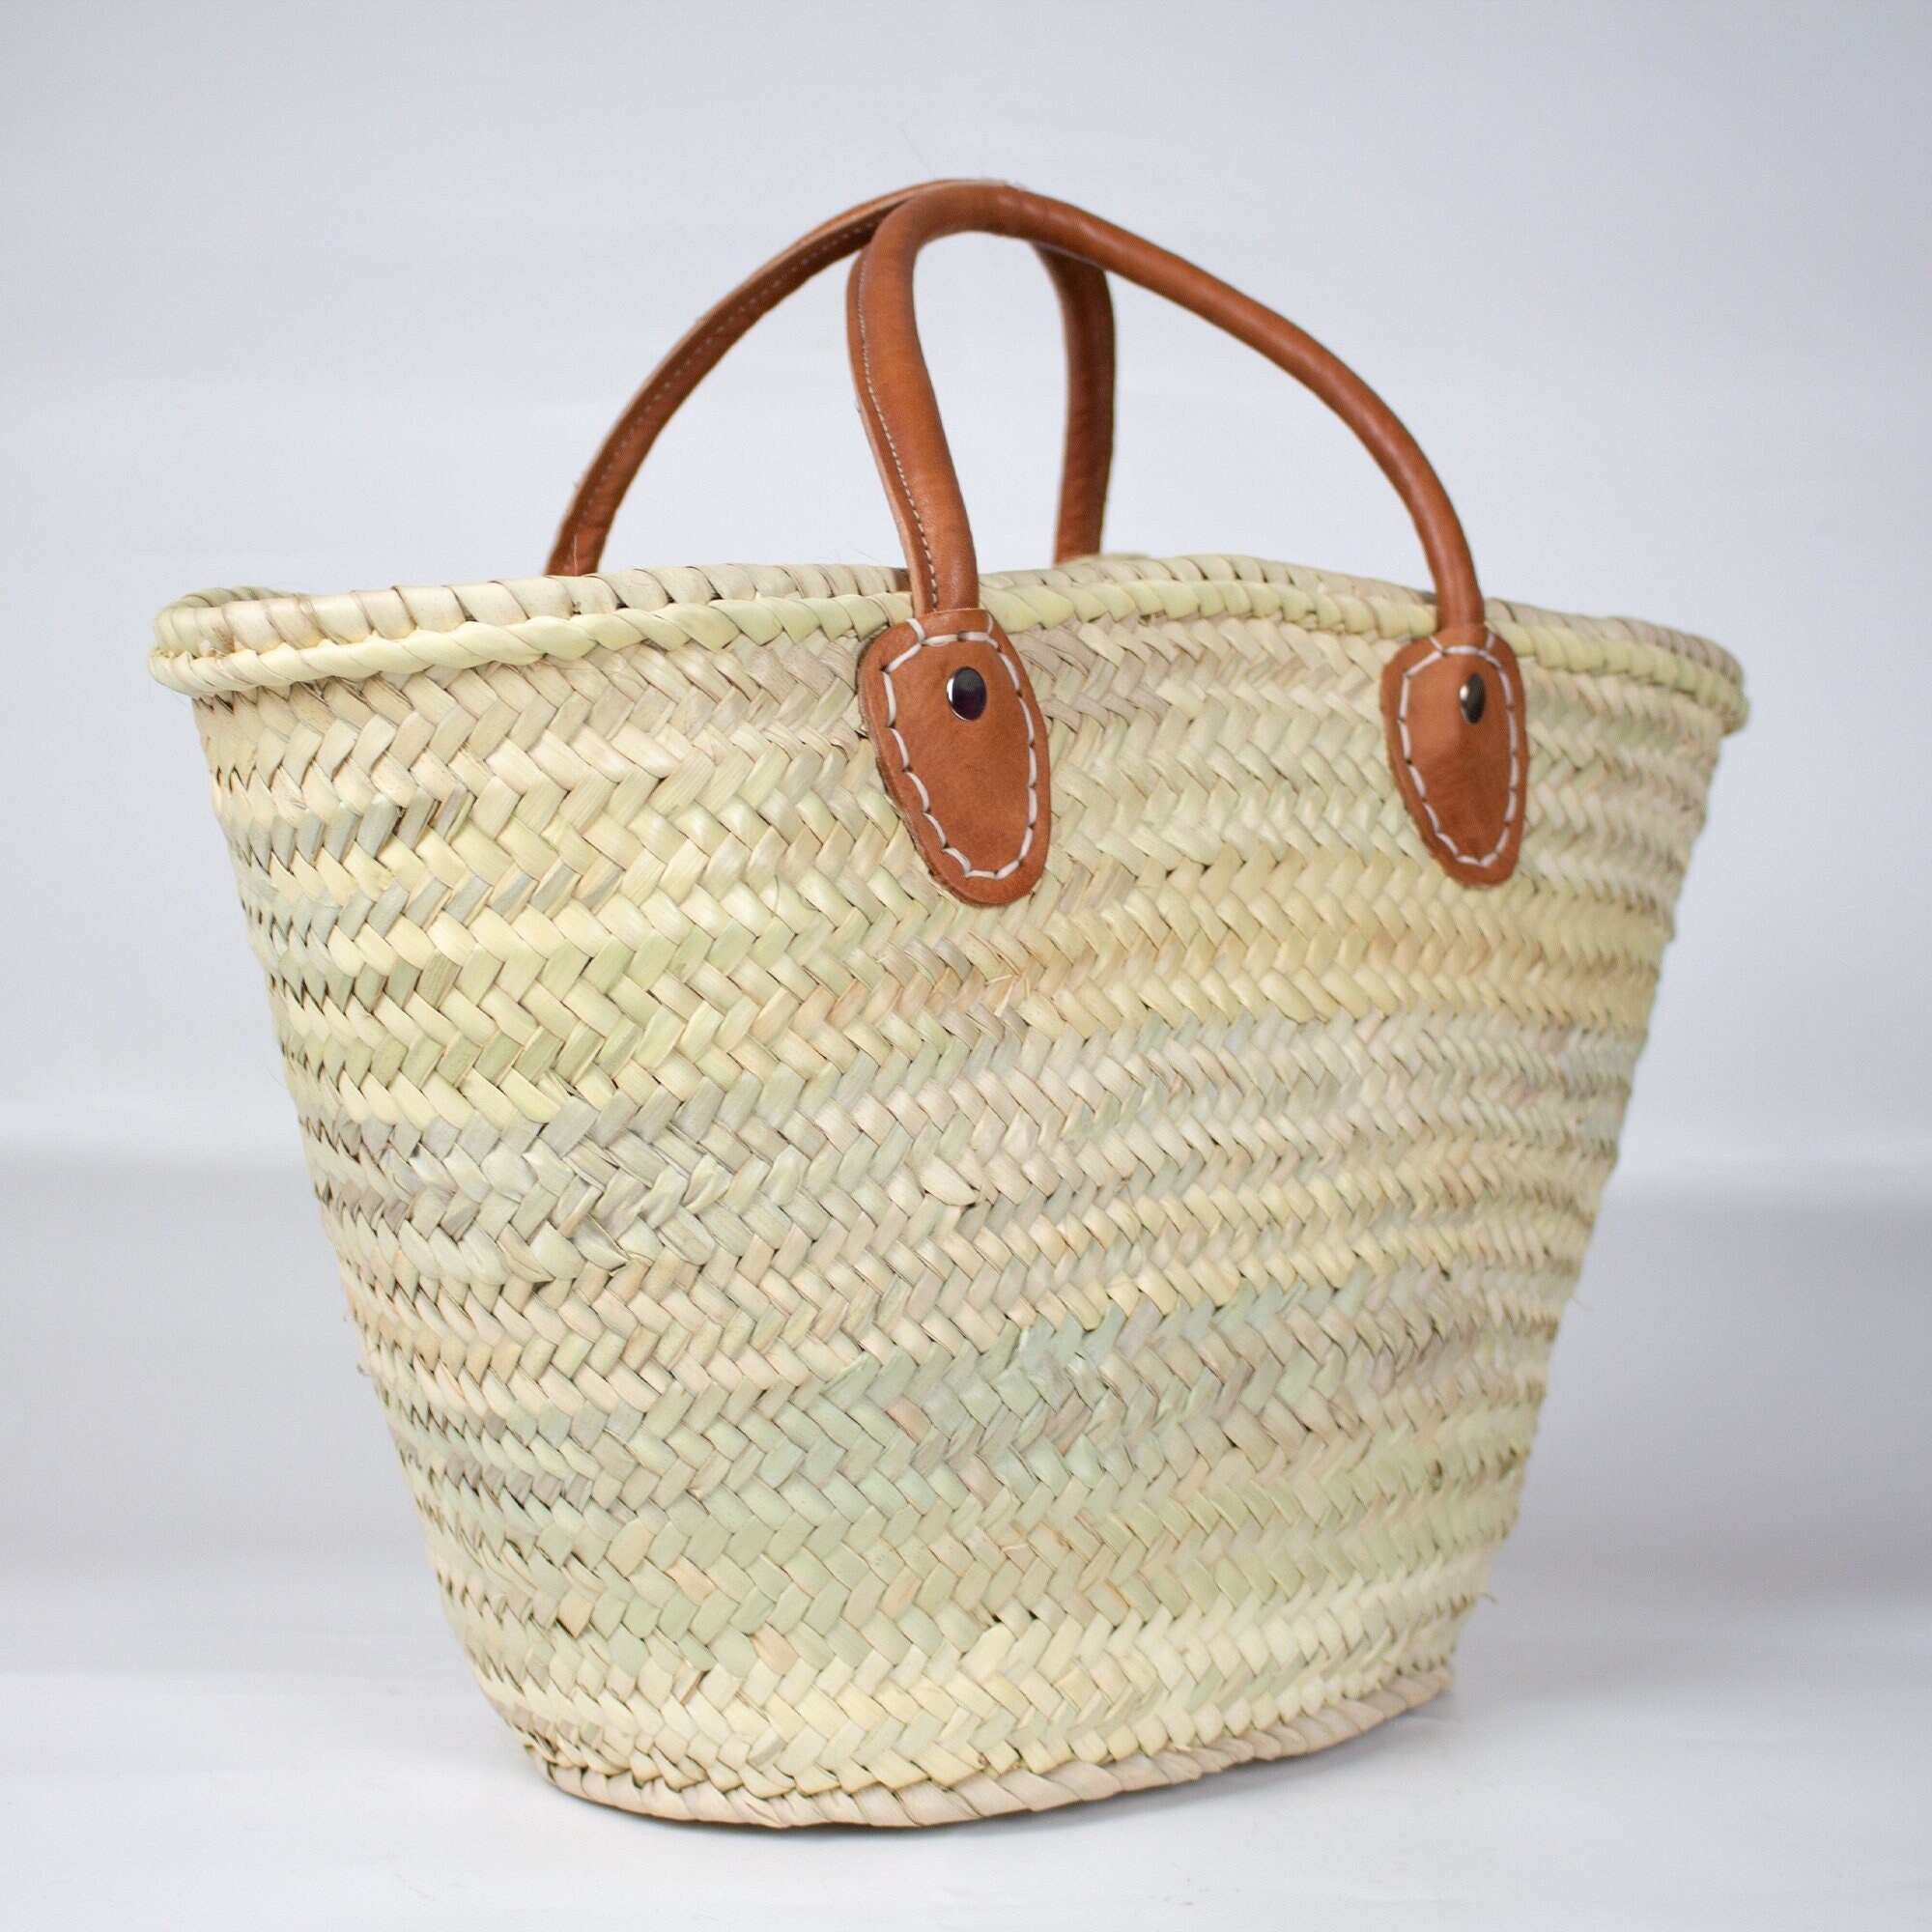 10 French Market Tote Basket with Leather Tote Strap and Basket